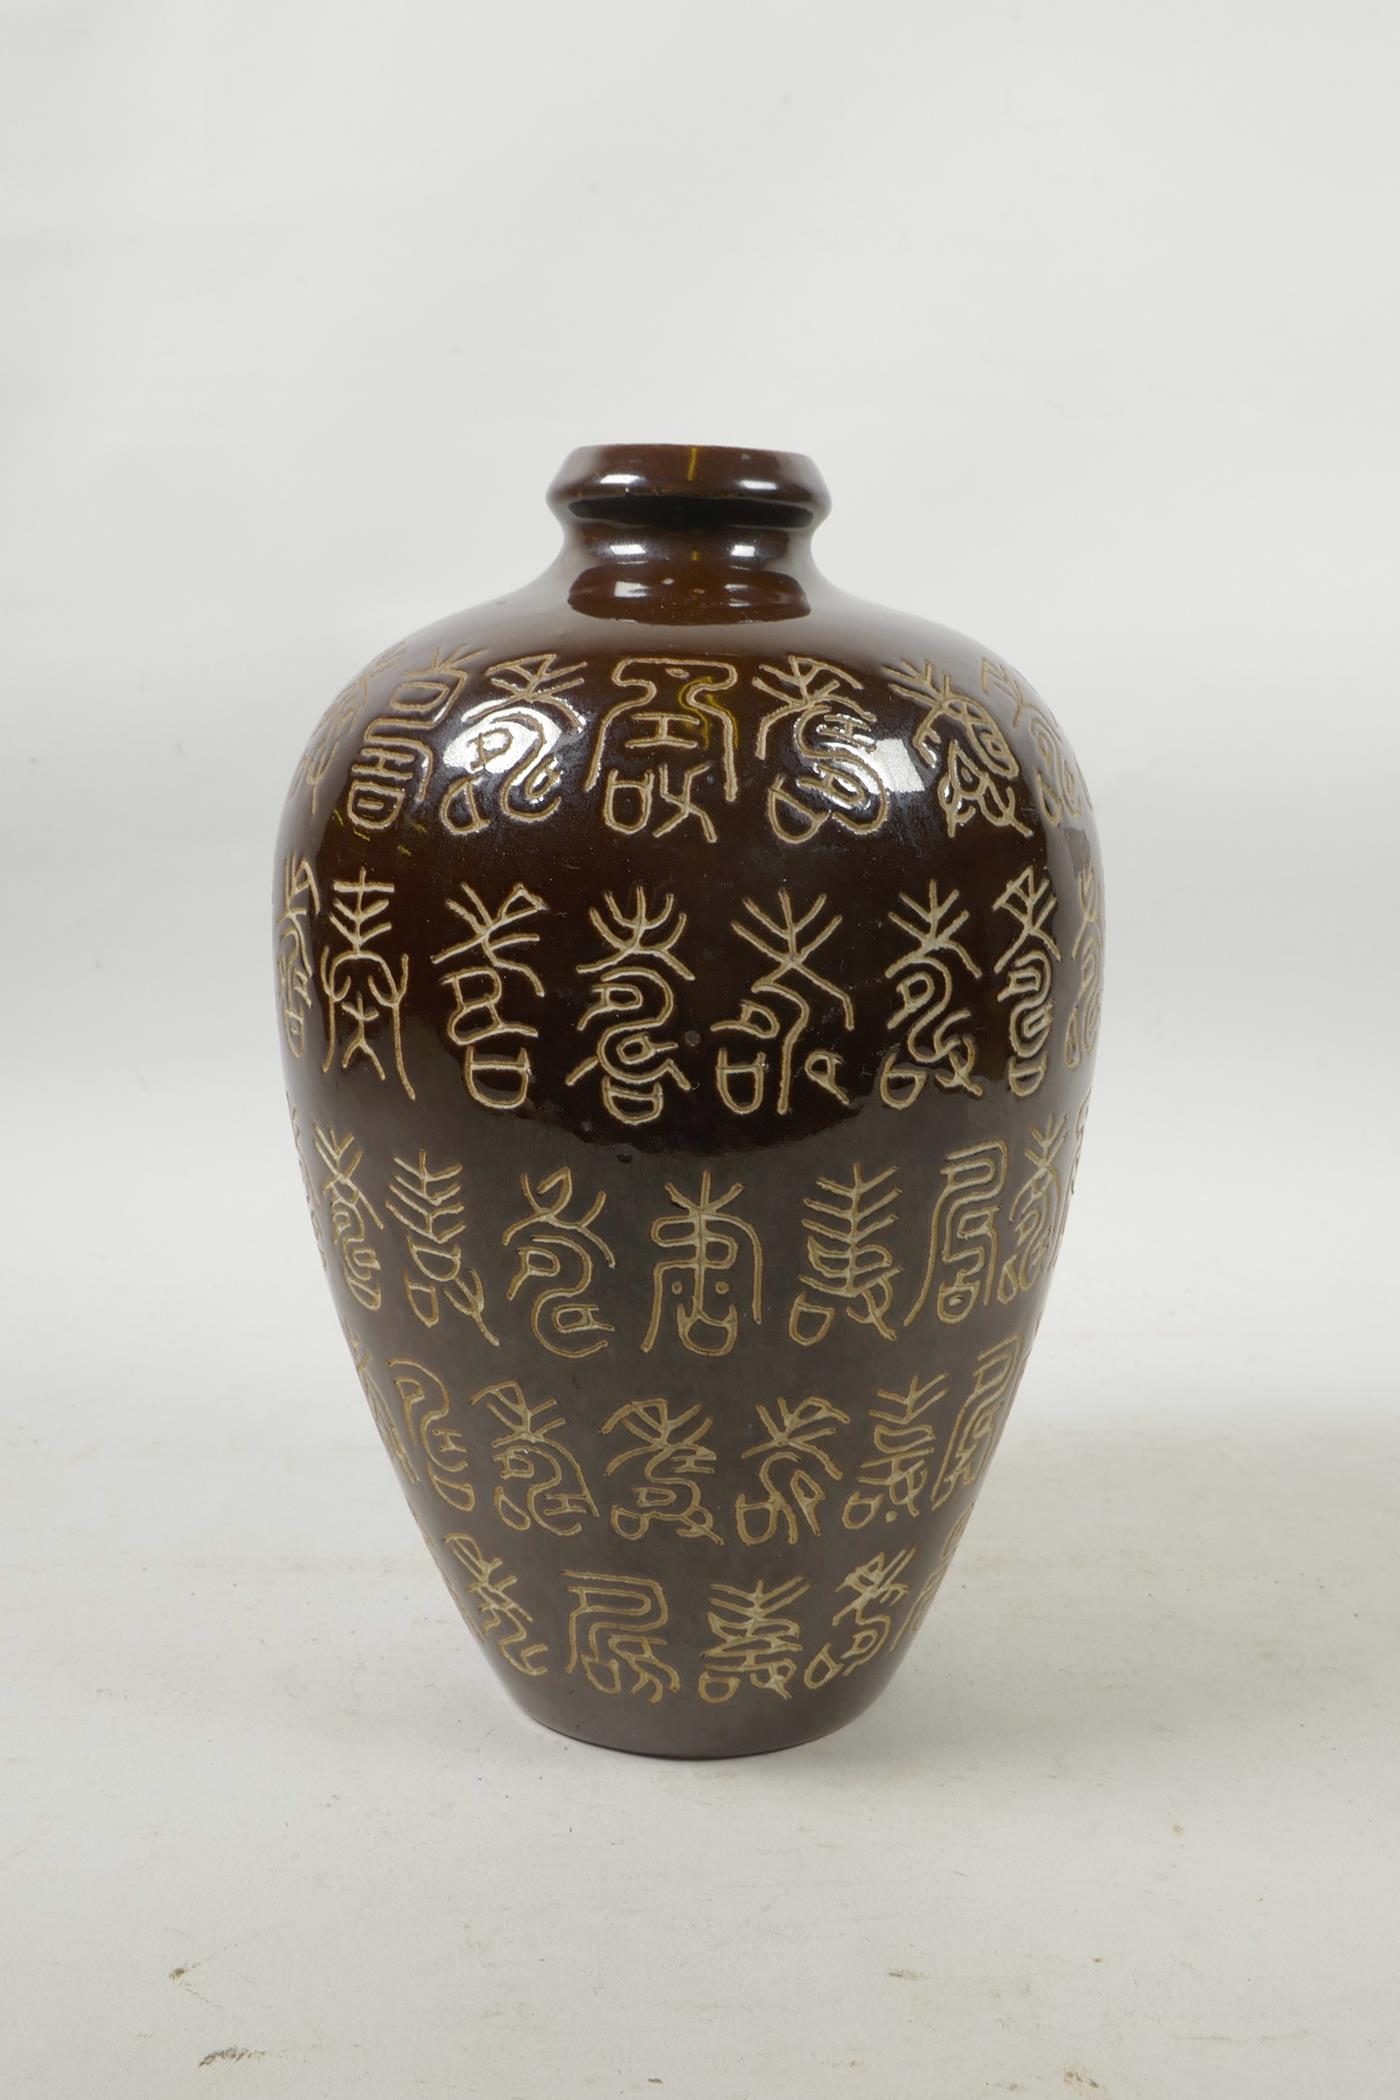 A Chinese treacle glazed porcelain vase with all over chased inscription decoration, 8½" high - Image 2 of 4